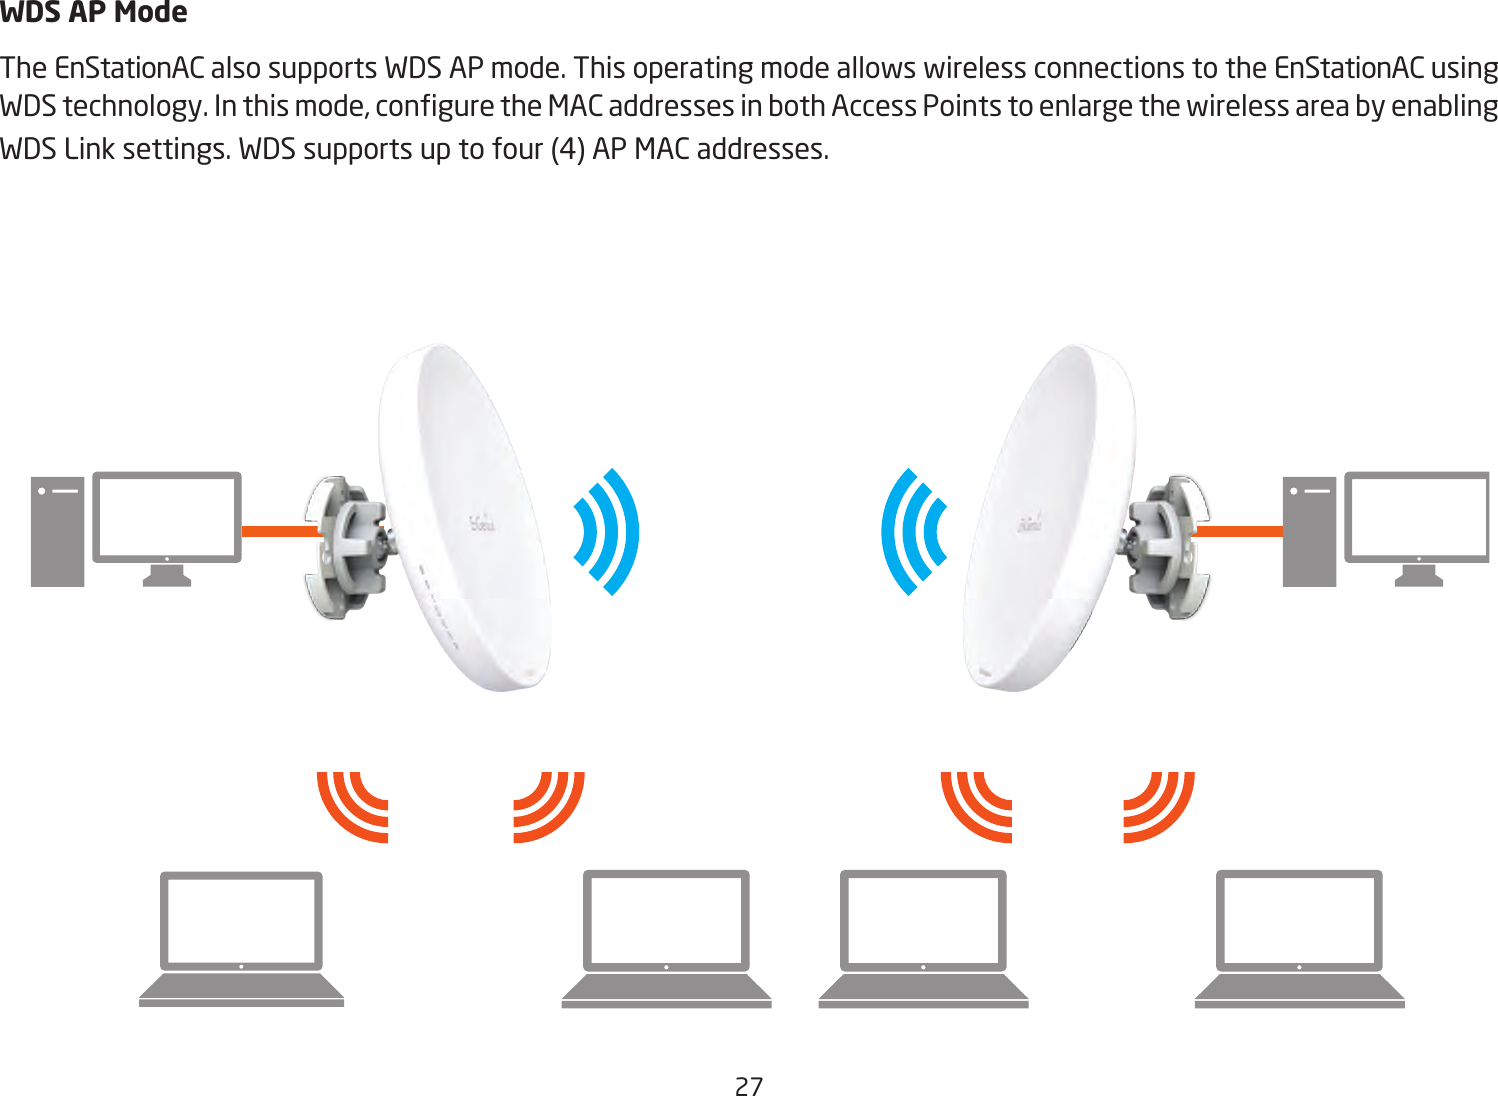 27WDS AP ModeThe EnStationAC also supports WDS AP mode. This operating mode allows wireless connections to the EnStationAC using WDStechnology.Inthismode,conguretheMACaddressesinbothAccessPointstoenlargethewirelessareabyenablingWDSLinksettings.WDSsupportsuptofour(4)APMACaddresses.